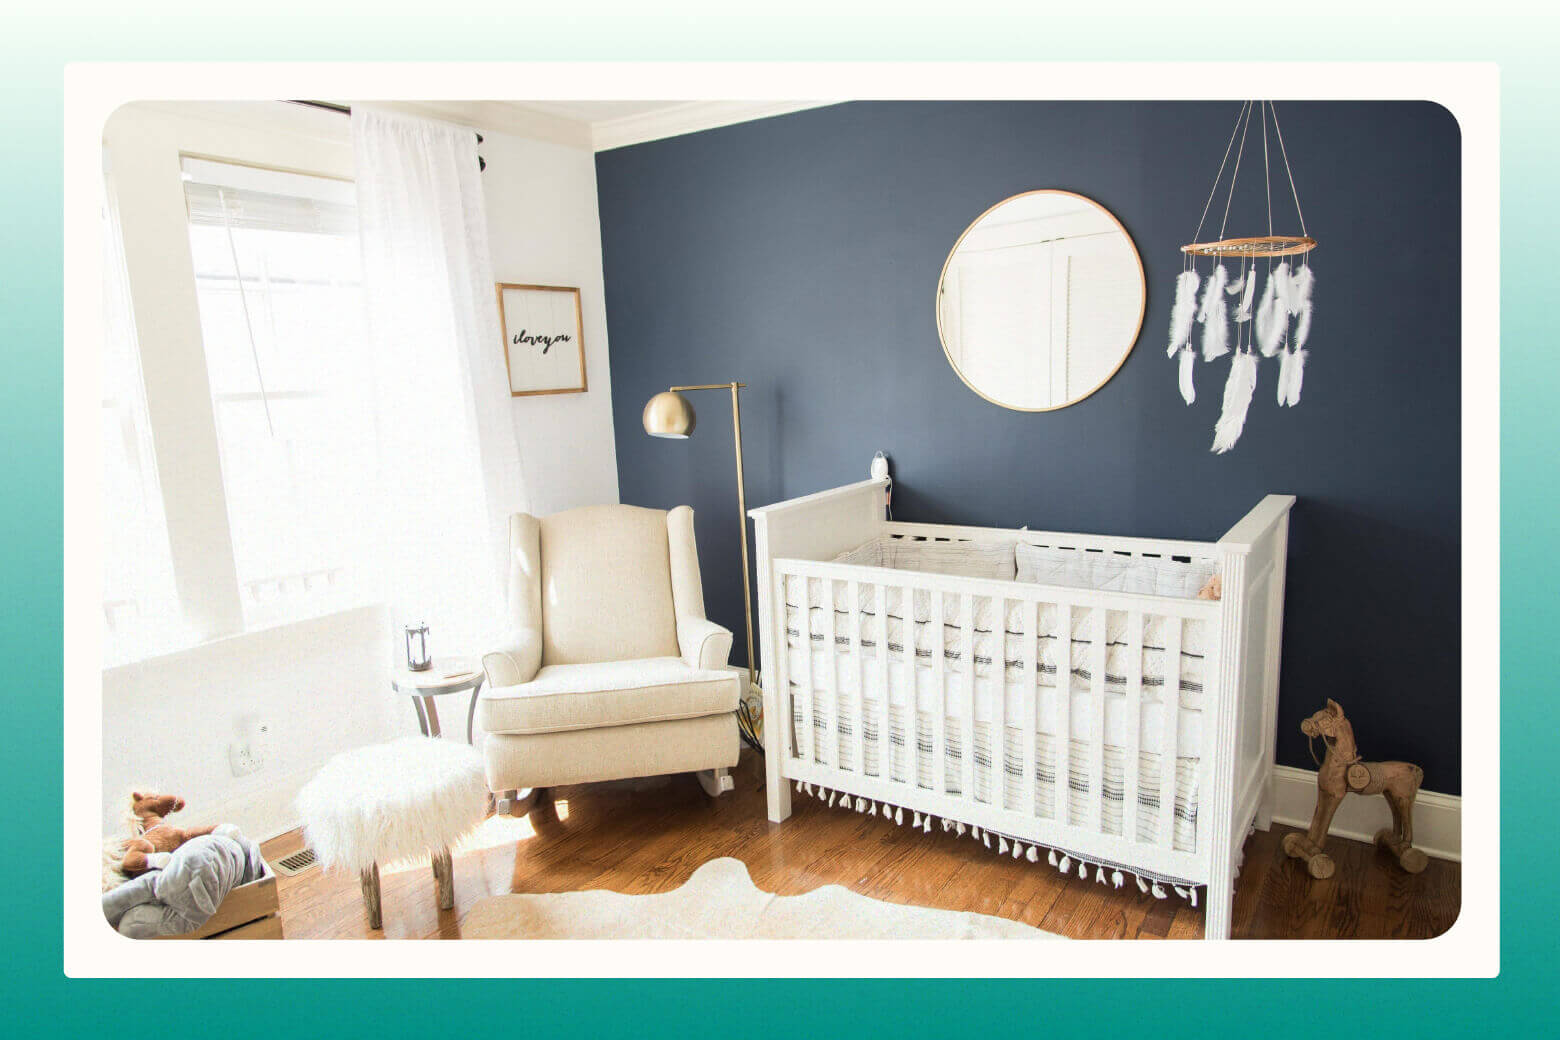 Baby's nursery decorated in mostly white with one dark dramatic wall painted black